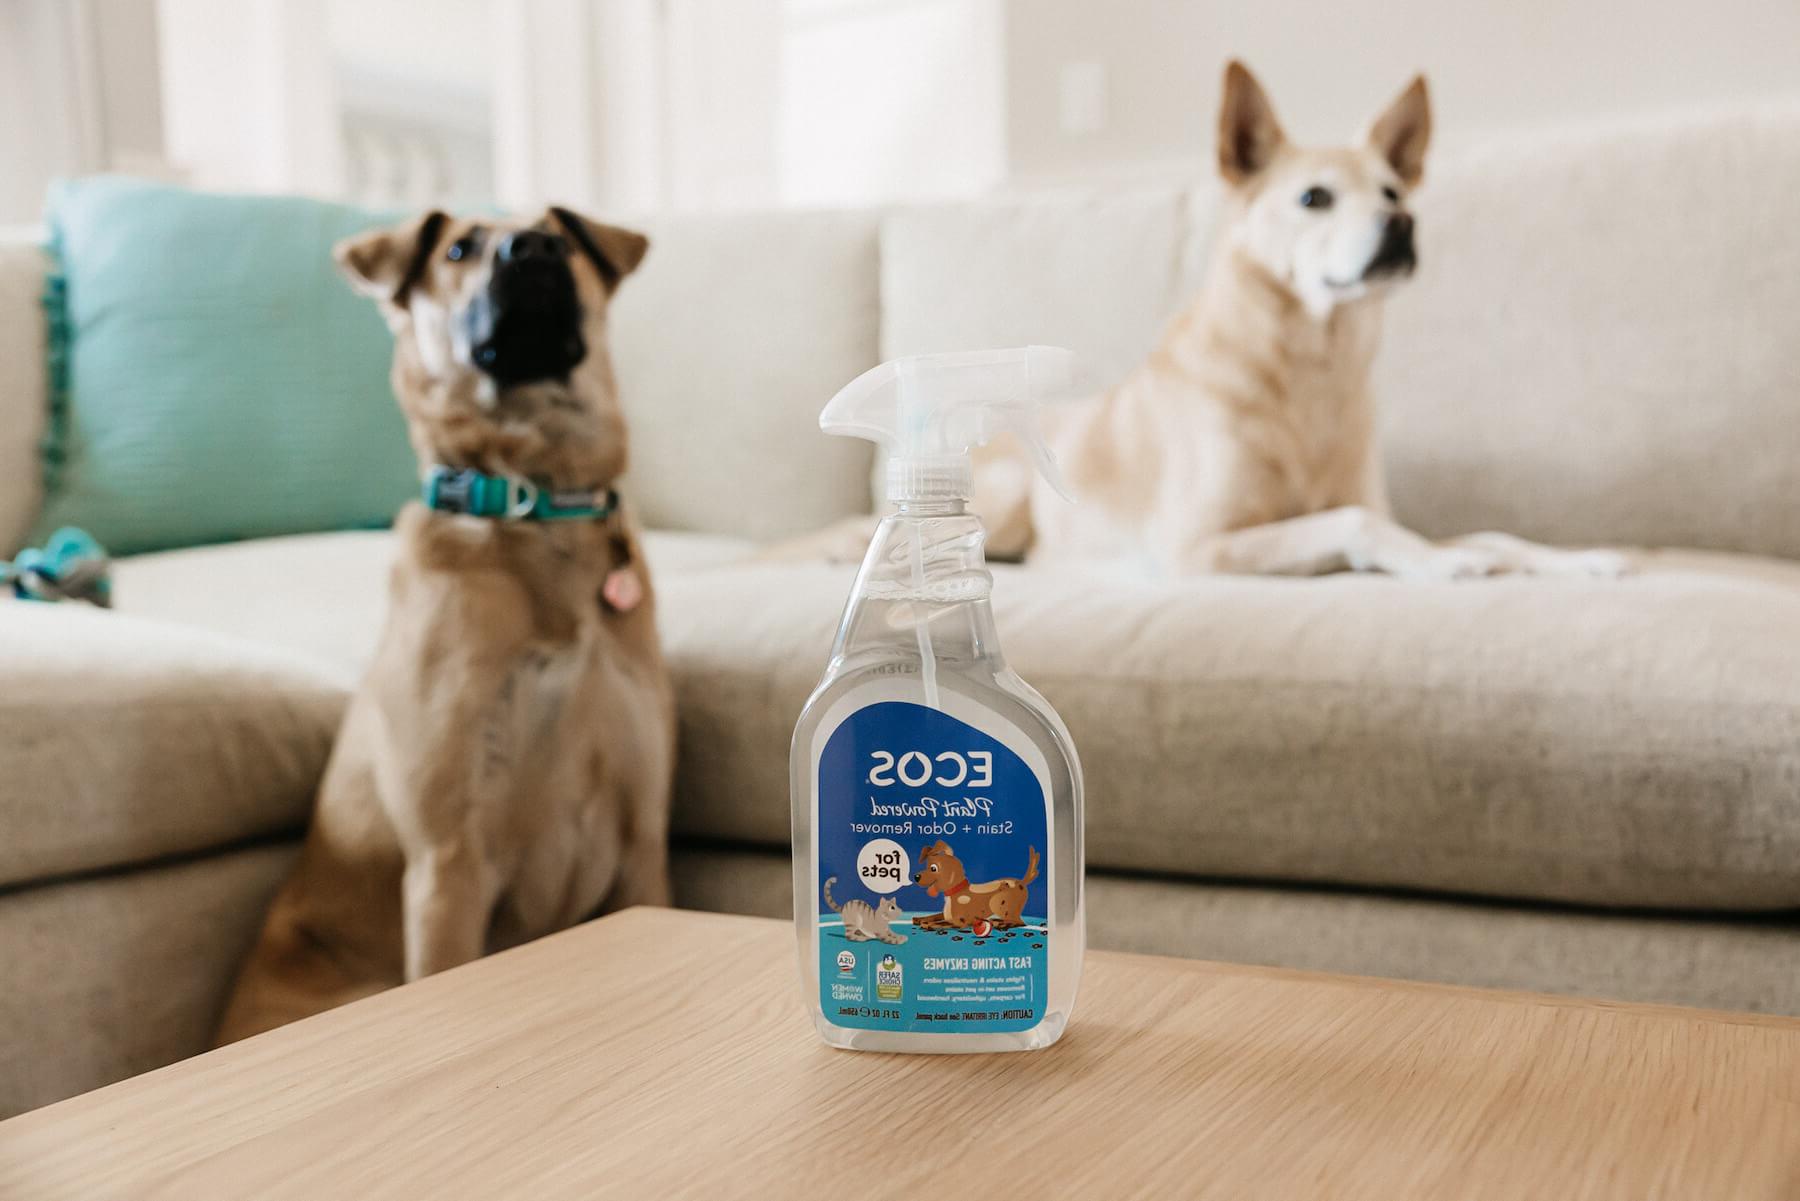 Curios Dogs With ECOS Stain Remover Spray